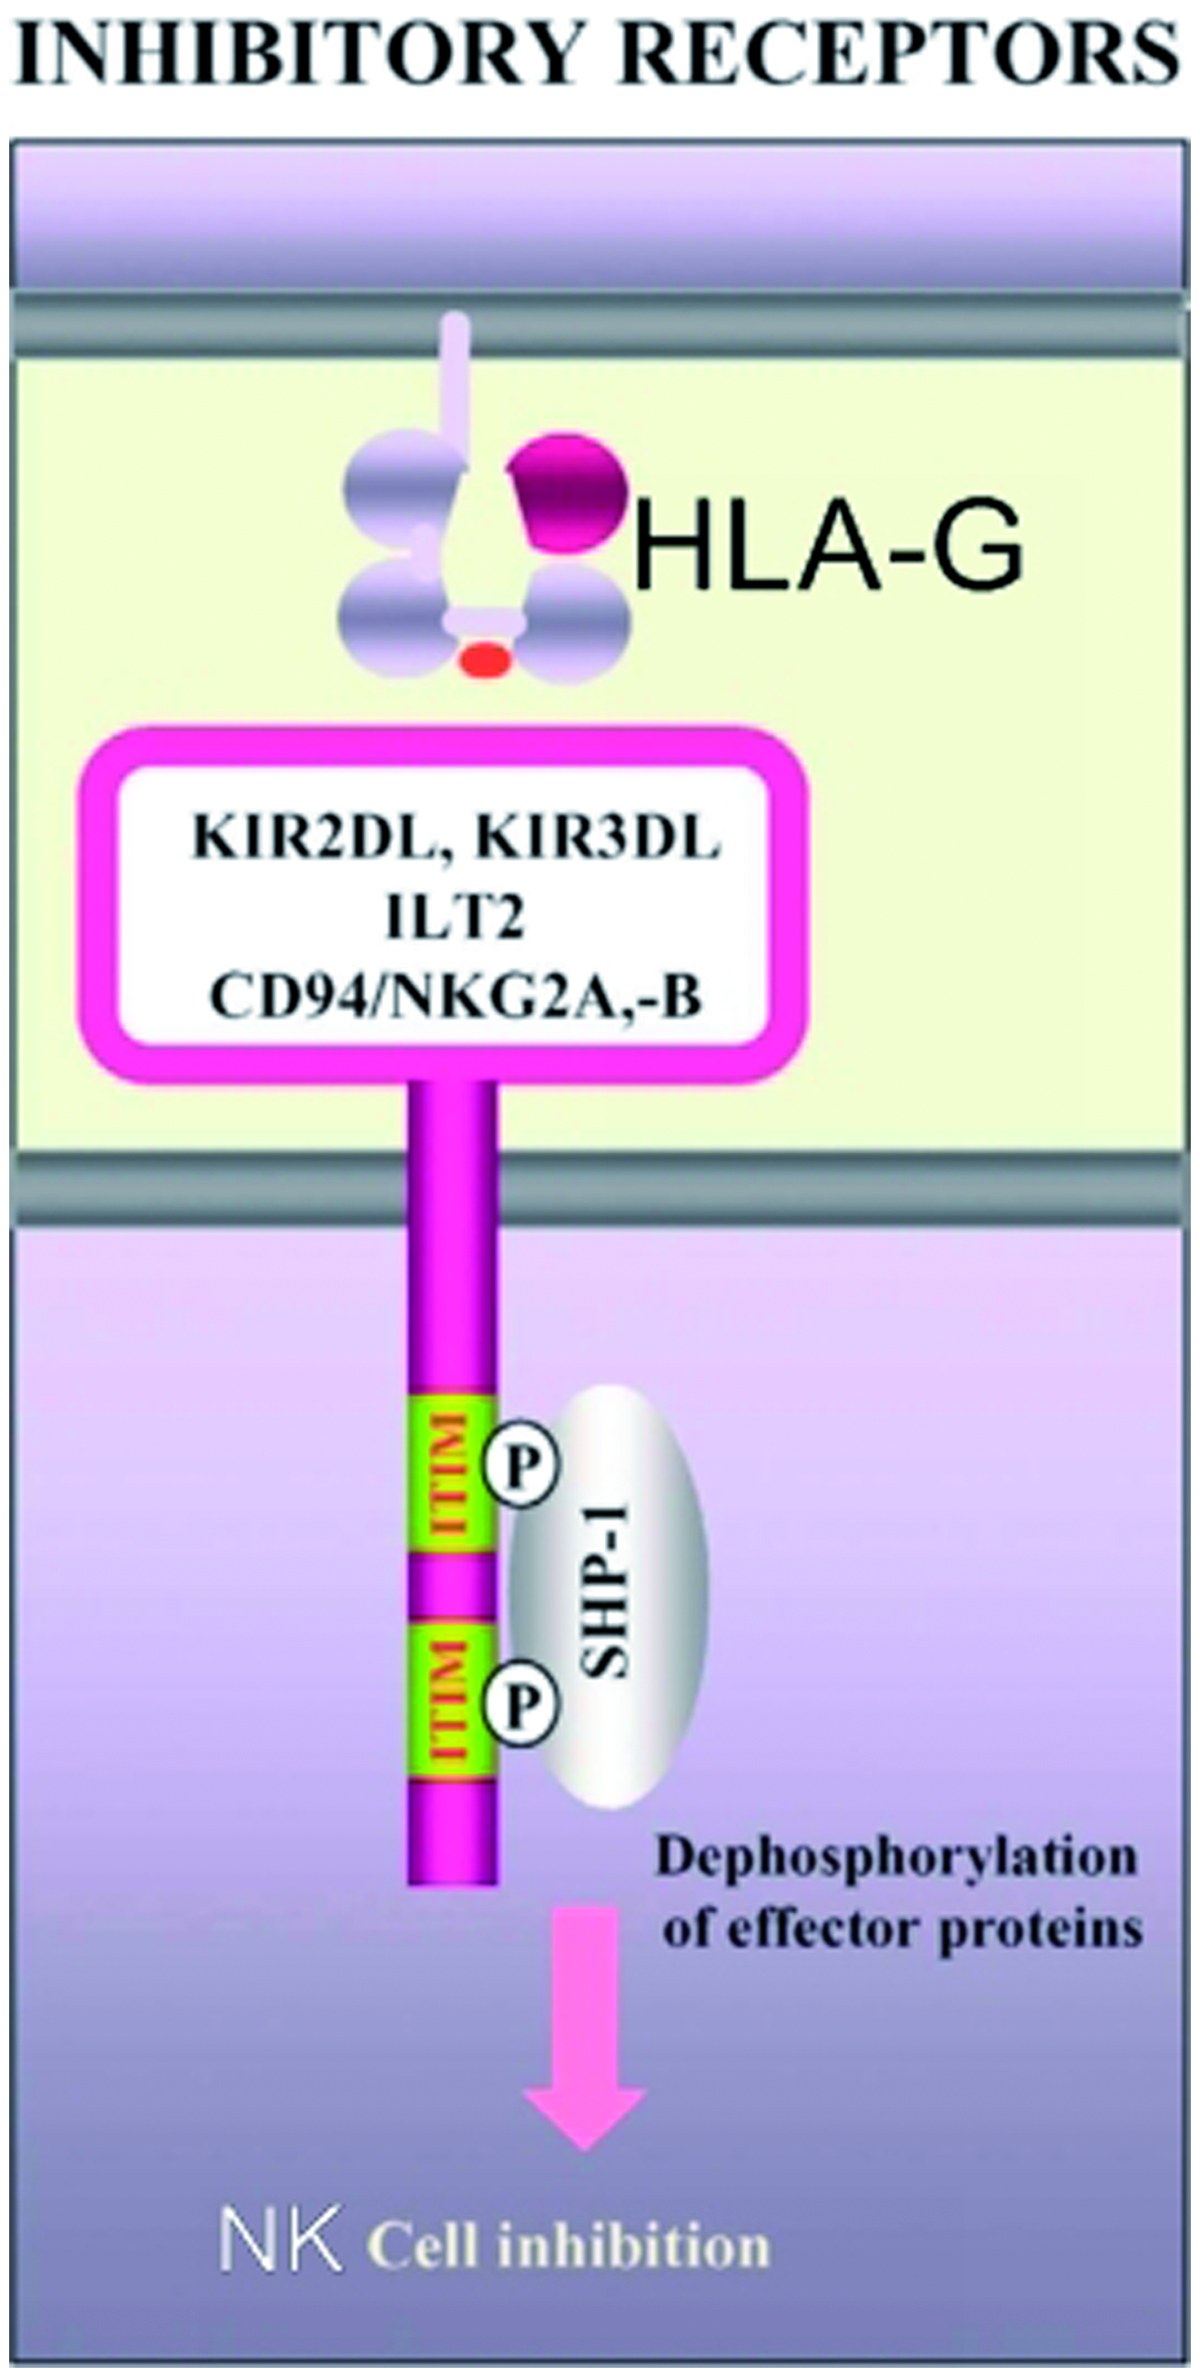 Figure 2. Inhibitory receptors associated with HLA-G. Schematic illustrates how ILT2 and KIR2DL4/HLA-G interactions can lead to inhibition of NK-cell functions.